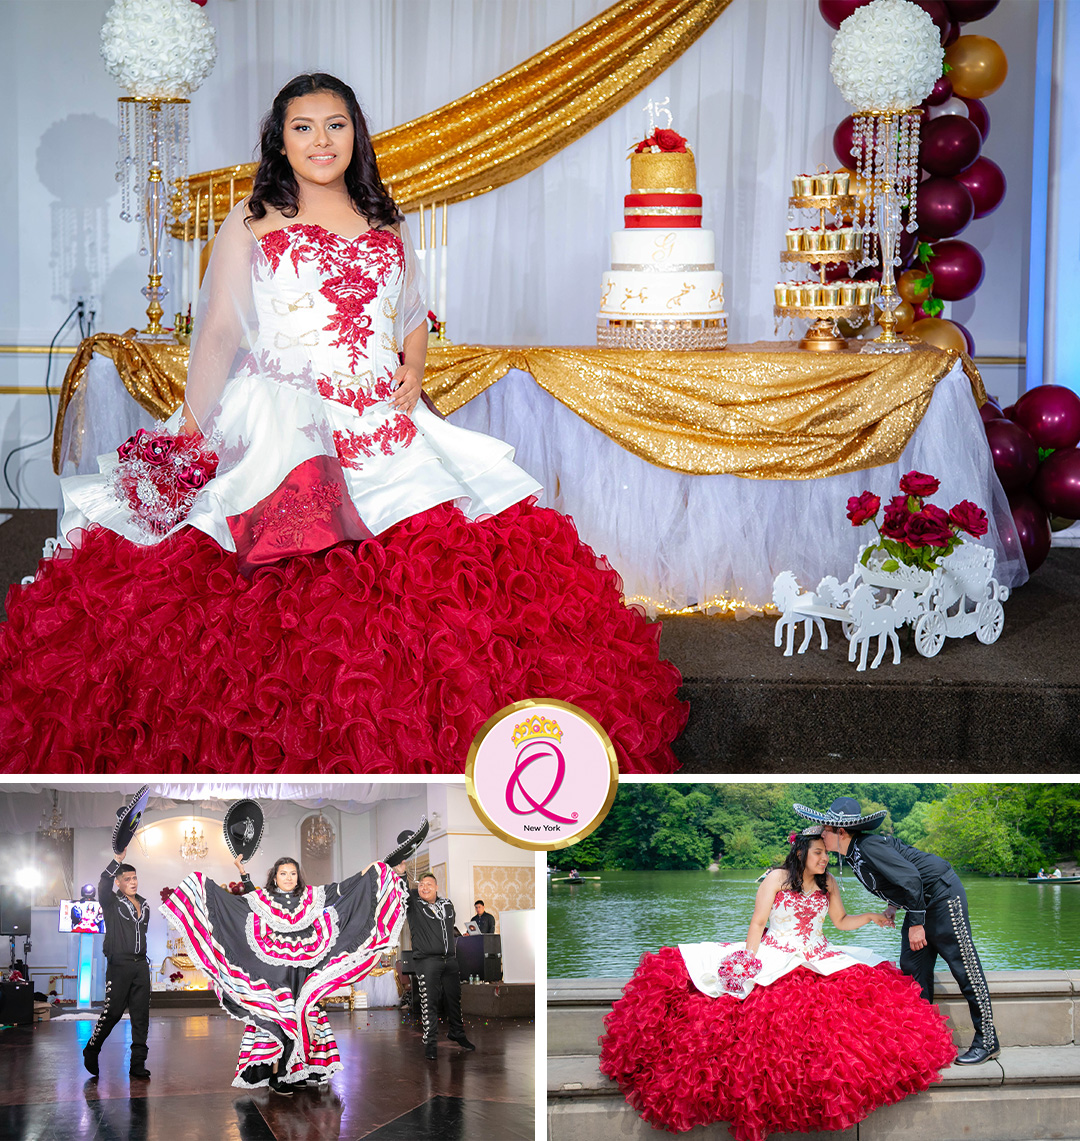 Gisselle's Quinces in Brooklyn Park New York.